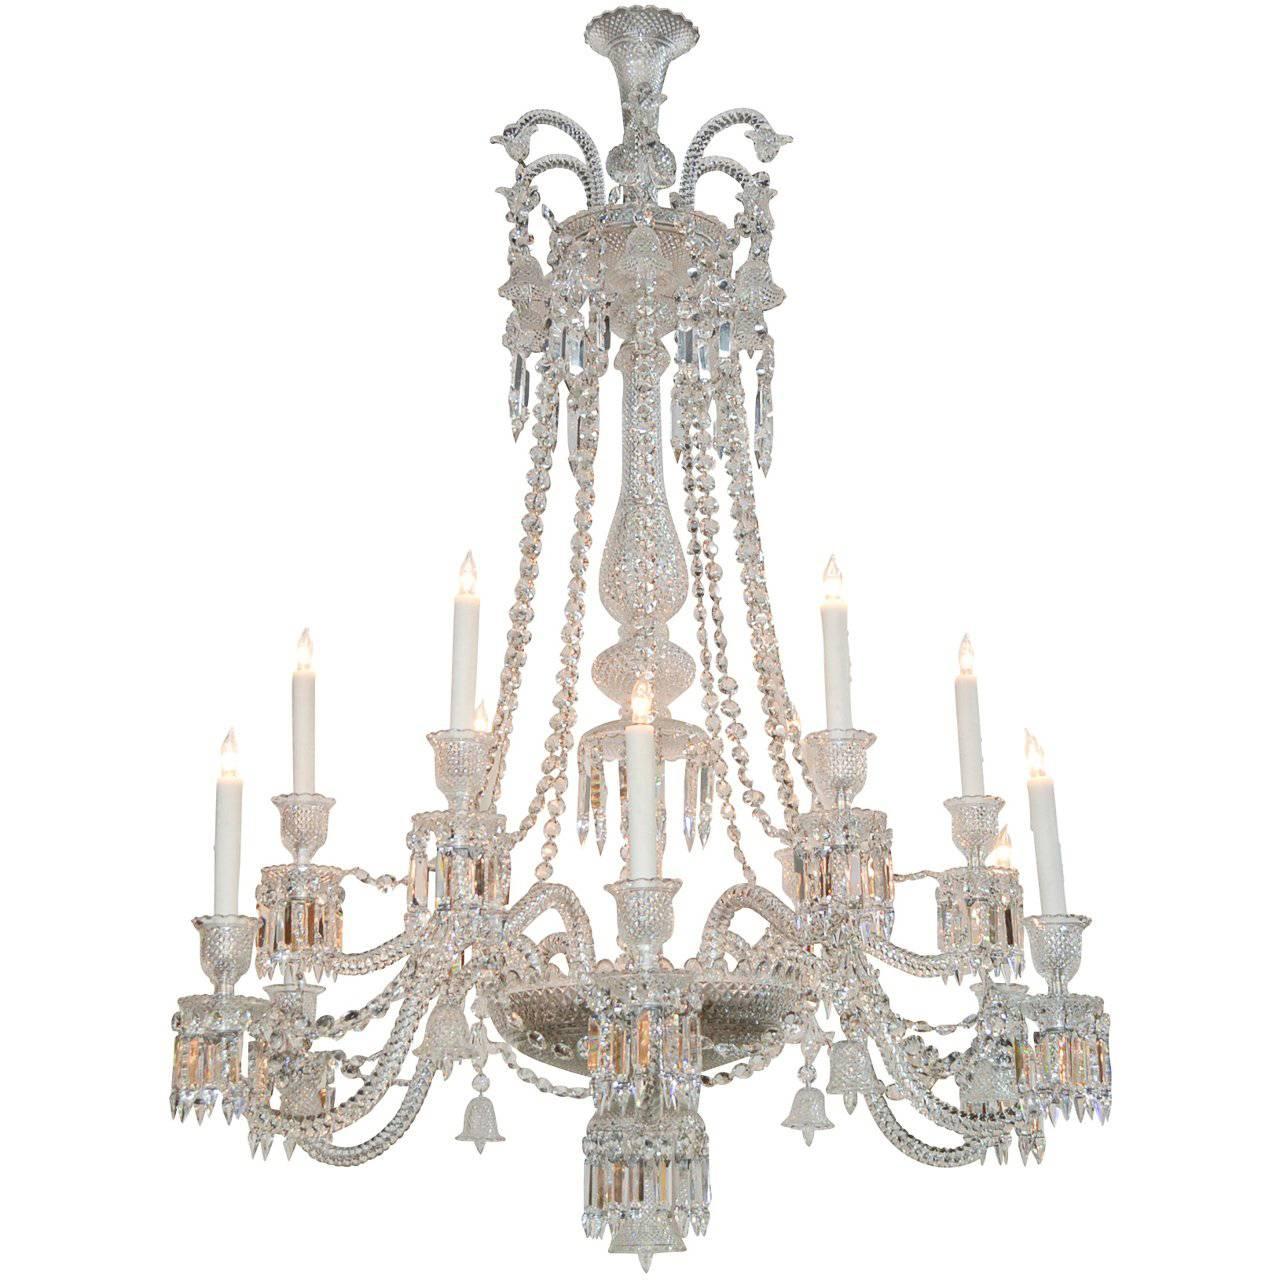 Exquisite French Baccarat Chandelier